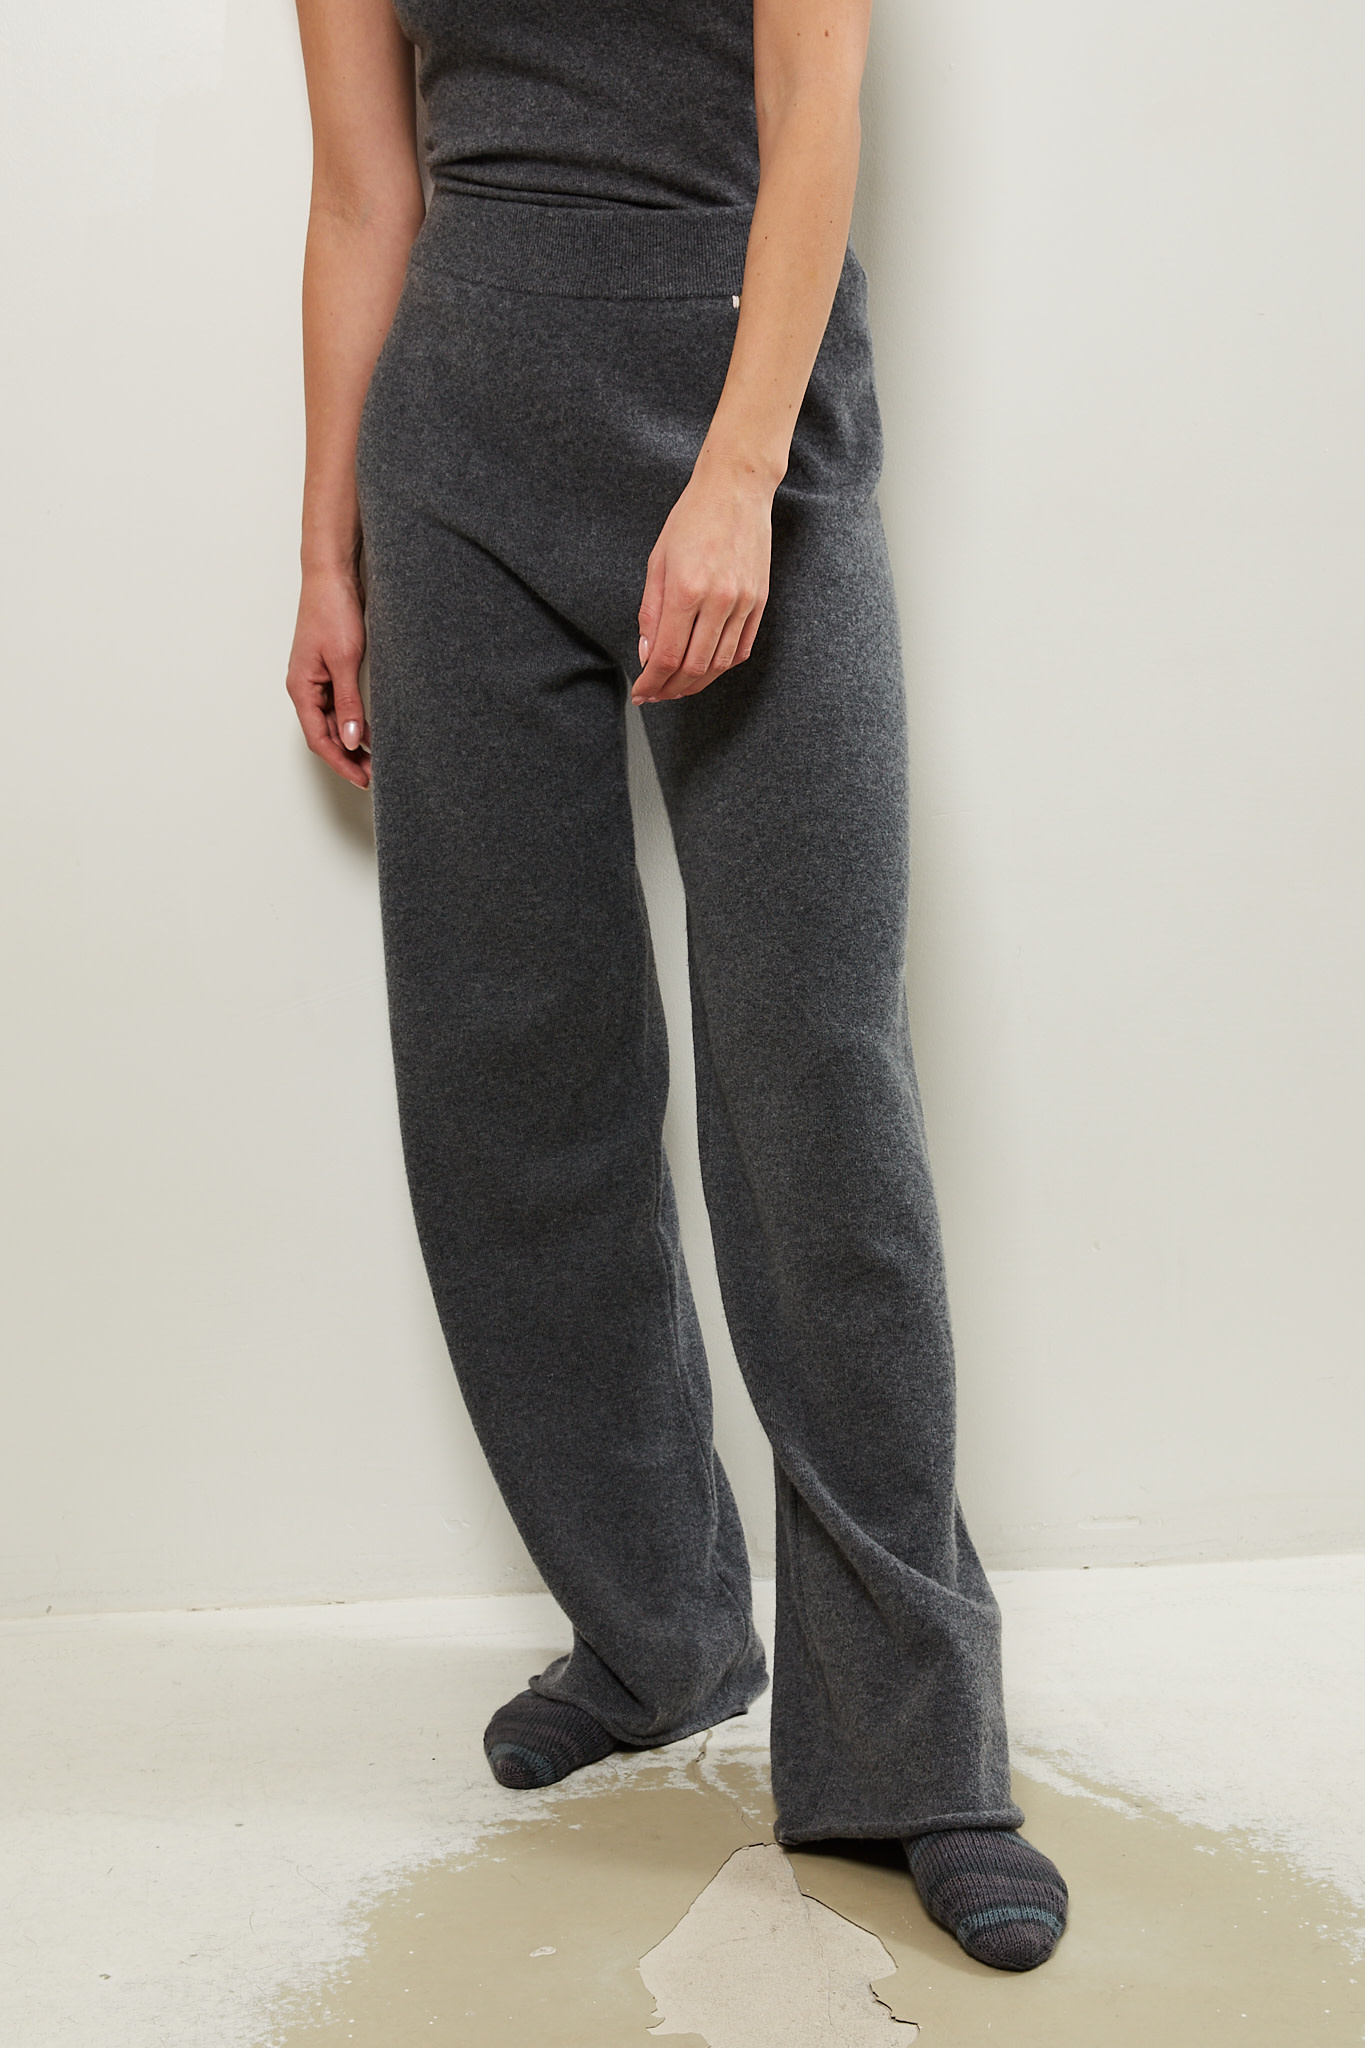 Extreme cashmere - Trousers cashmere trousers